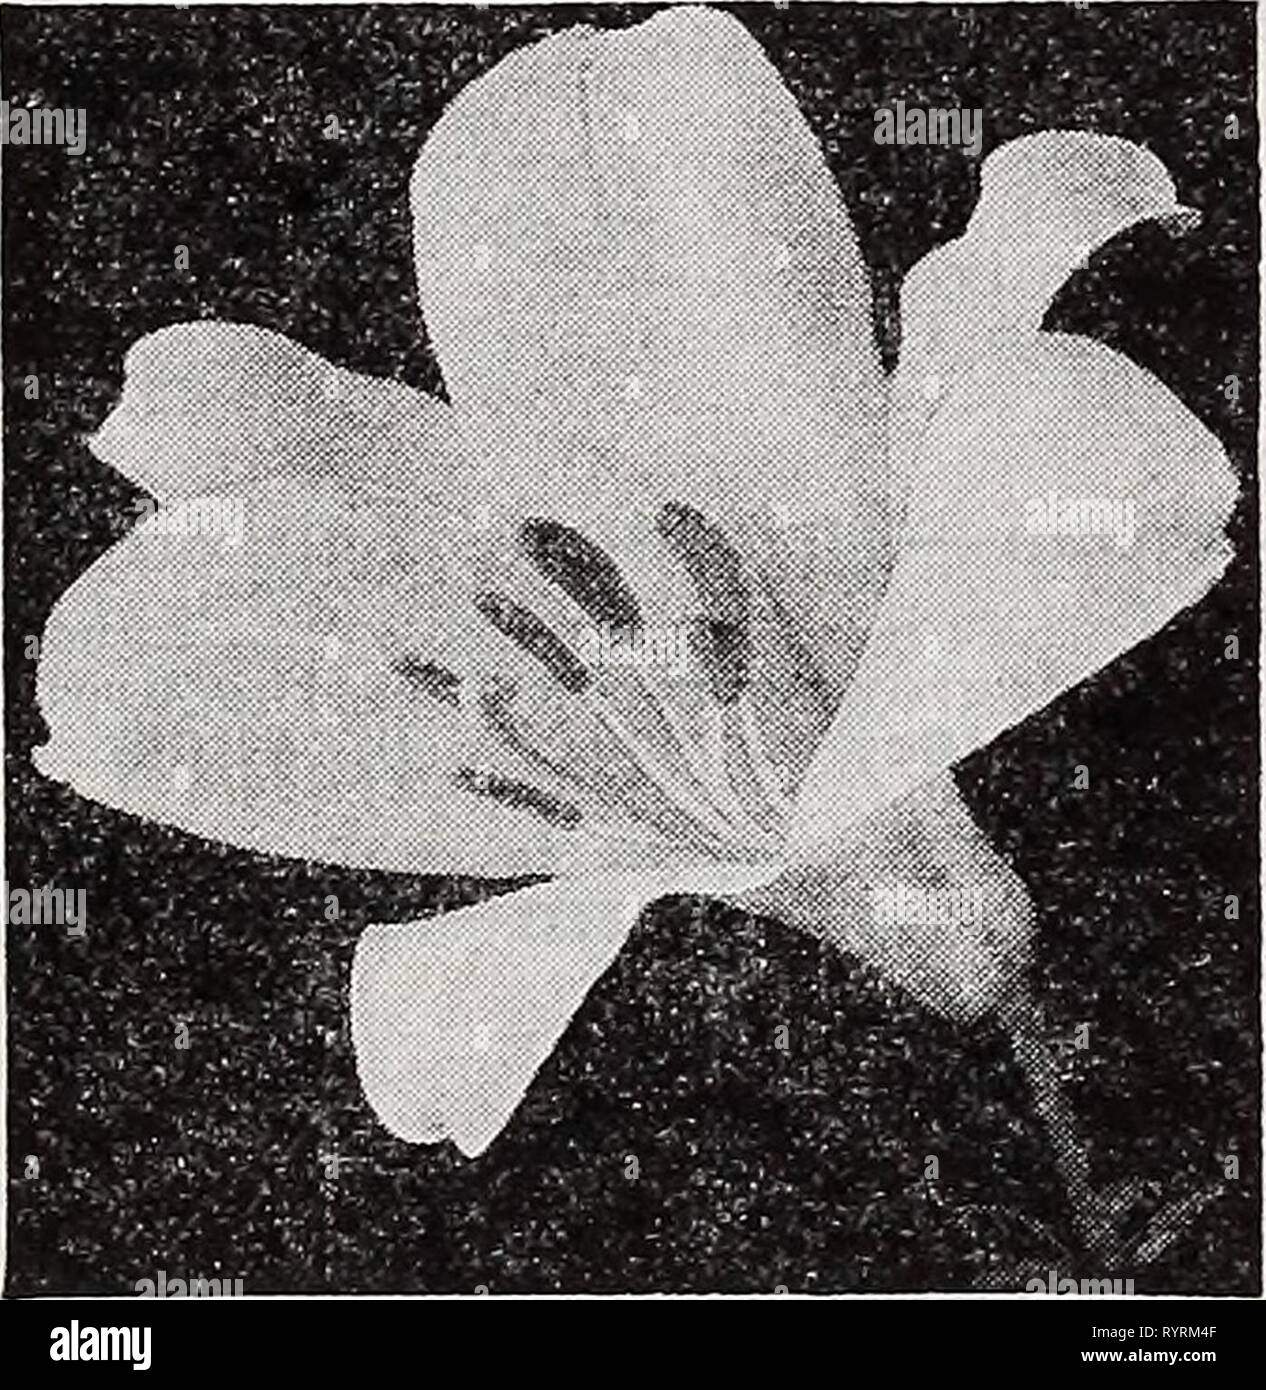 Dreer's wholesale catalog for florists Dreer's wholesale catalog for florists and market gardeners : 1940 winter spring summer . dreerswholesalec1940henr Year: 1940  HENRY A. DREER, Inc. Perennial Flower Seeds WHOLESALE CATALOG Incarvillea—Hardy Gloxinia Delavayl. A showy plant for the hardy border produc- ing large Gloxlnla-like rose-colored flowers on 15 to 18-inch high stems during June and July. Should be well protected with leaves or litter during the winter. Trade pkt. 50c; oz. $4.00. Japanese Iris Kaeiupferl (Japanese Iris). The seeds we offer have been saved from an unrivaled collectio Stock Photo